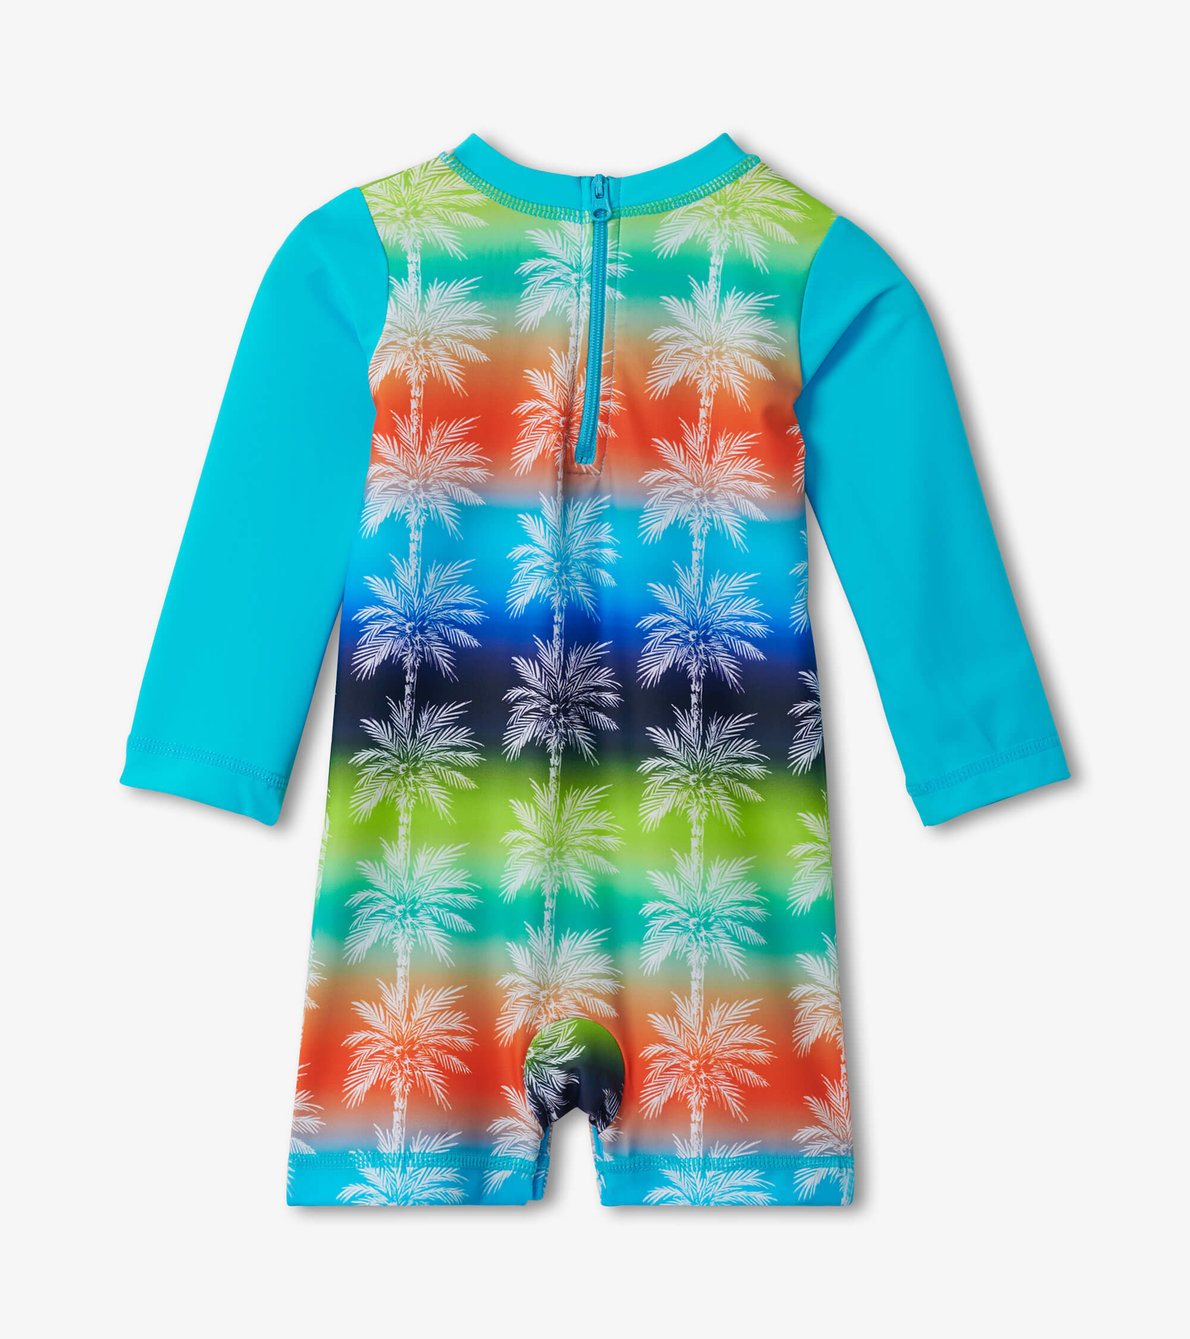 View larger image of Gradient Palms Baby One-Piece Rashguard